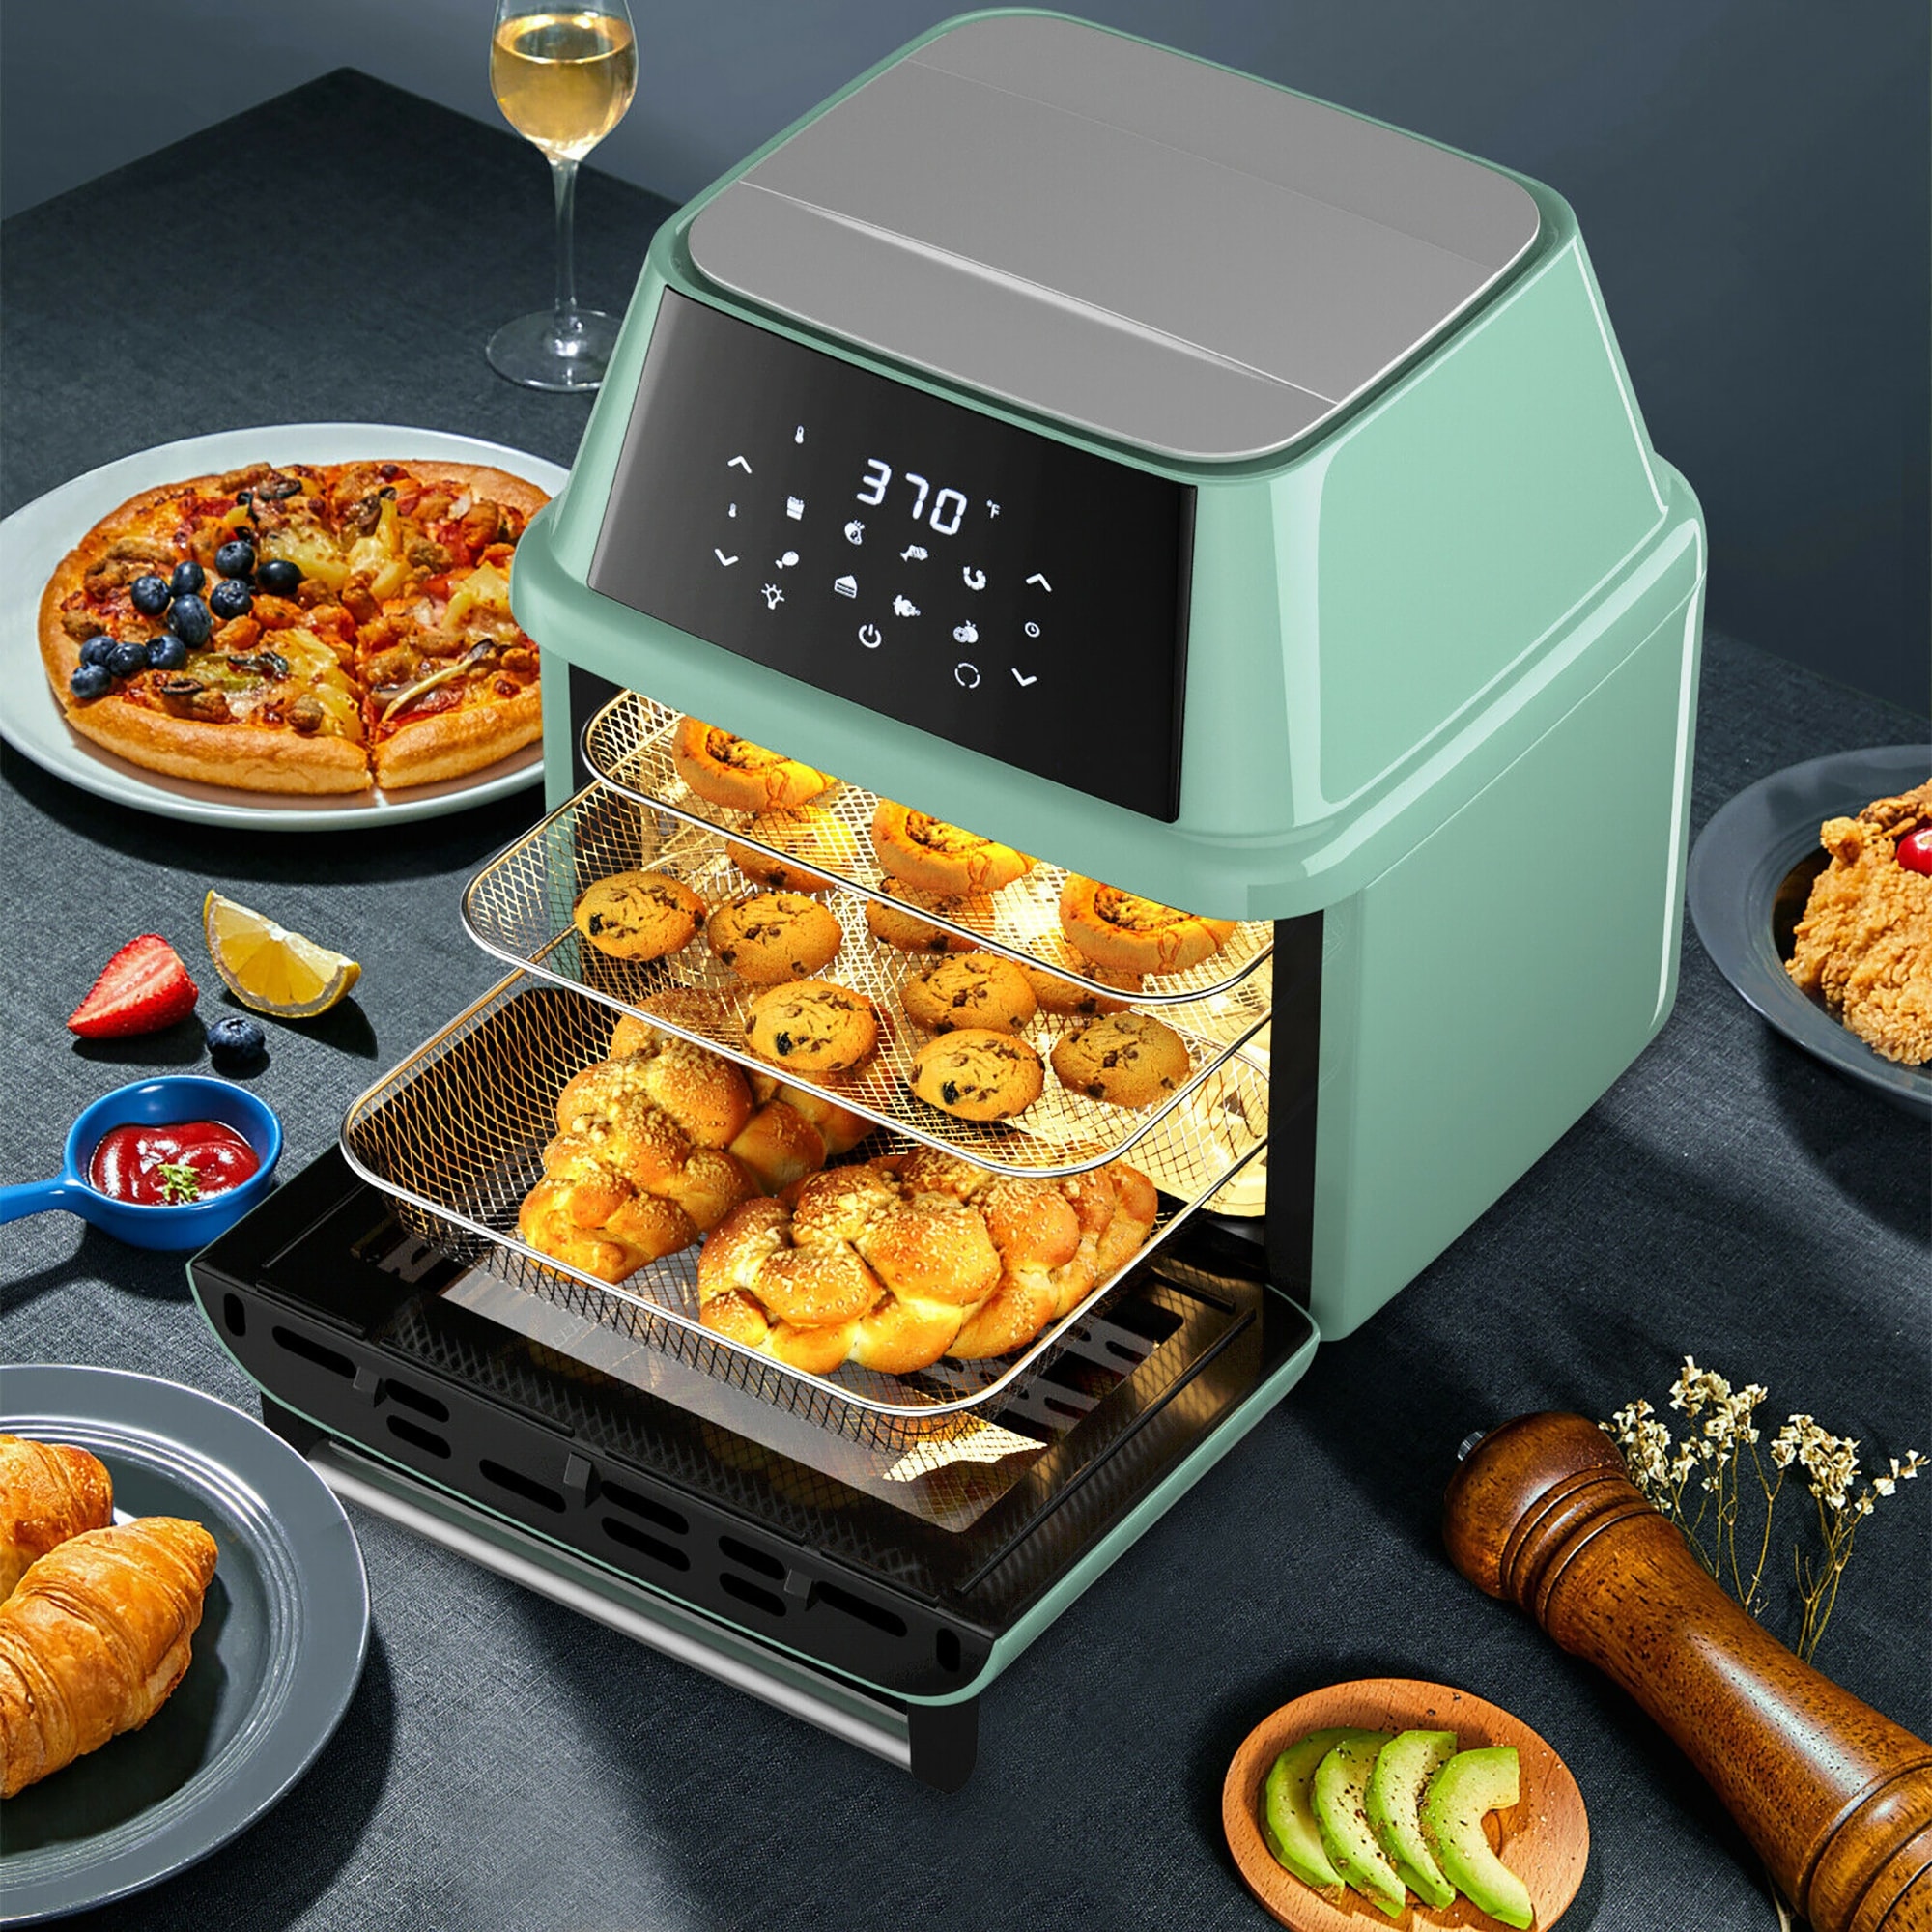 https://ak1.ostkcdn.com/images/products/is/images/direct/ad87b28bc018d296804d11aecdb47e79da2cf206/Costway-19-QT-Multi-functional-Air-Fryer-Oven-Dehydrator-Rotisserie.jpg